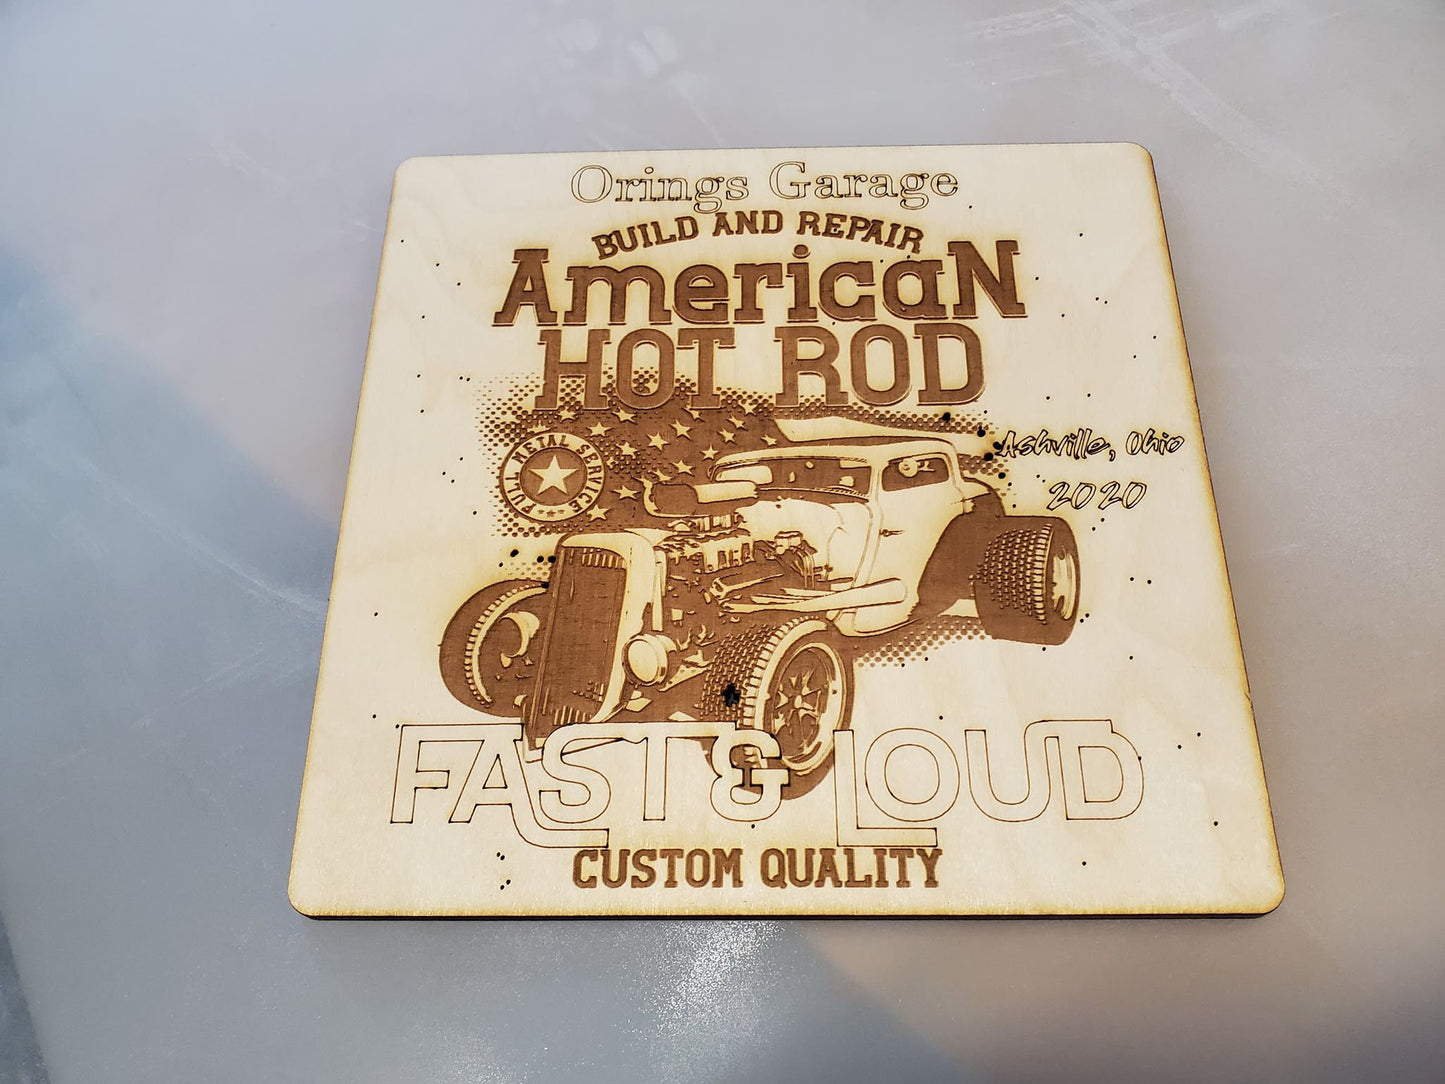 Classic Car Show, Award, Plaque, American Hot Rod, Garage, Custom, Personalize, Engraved, Wood, Dad Gift,